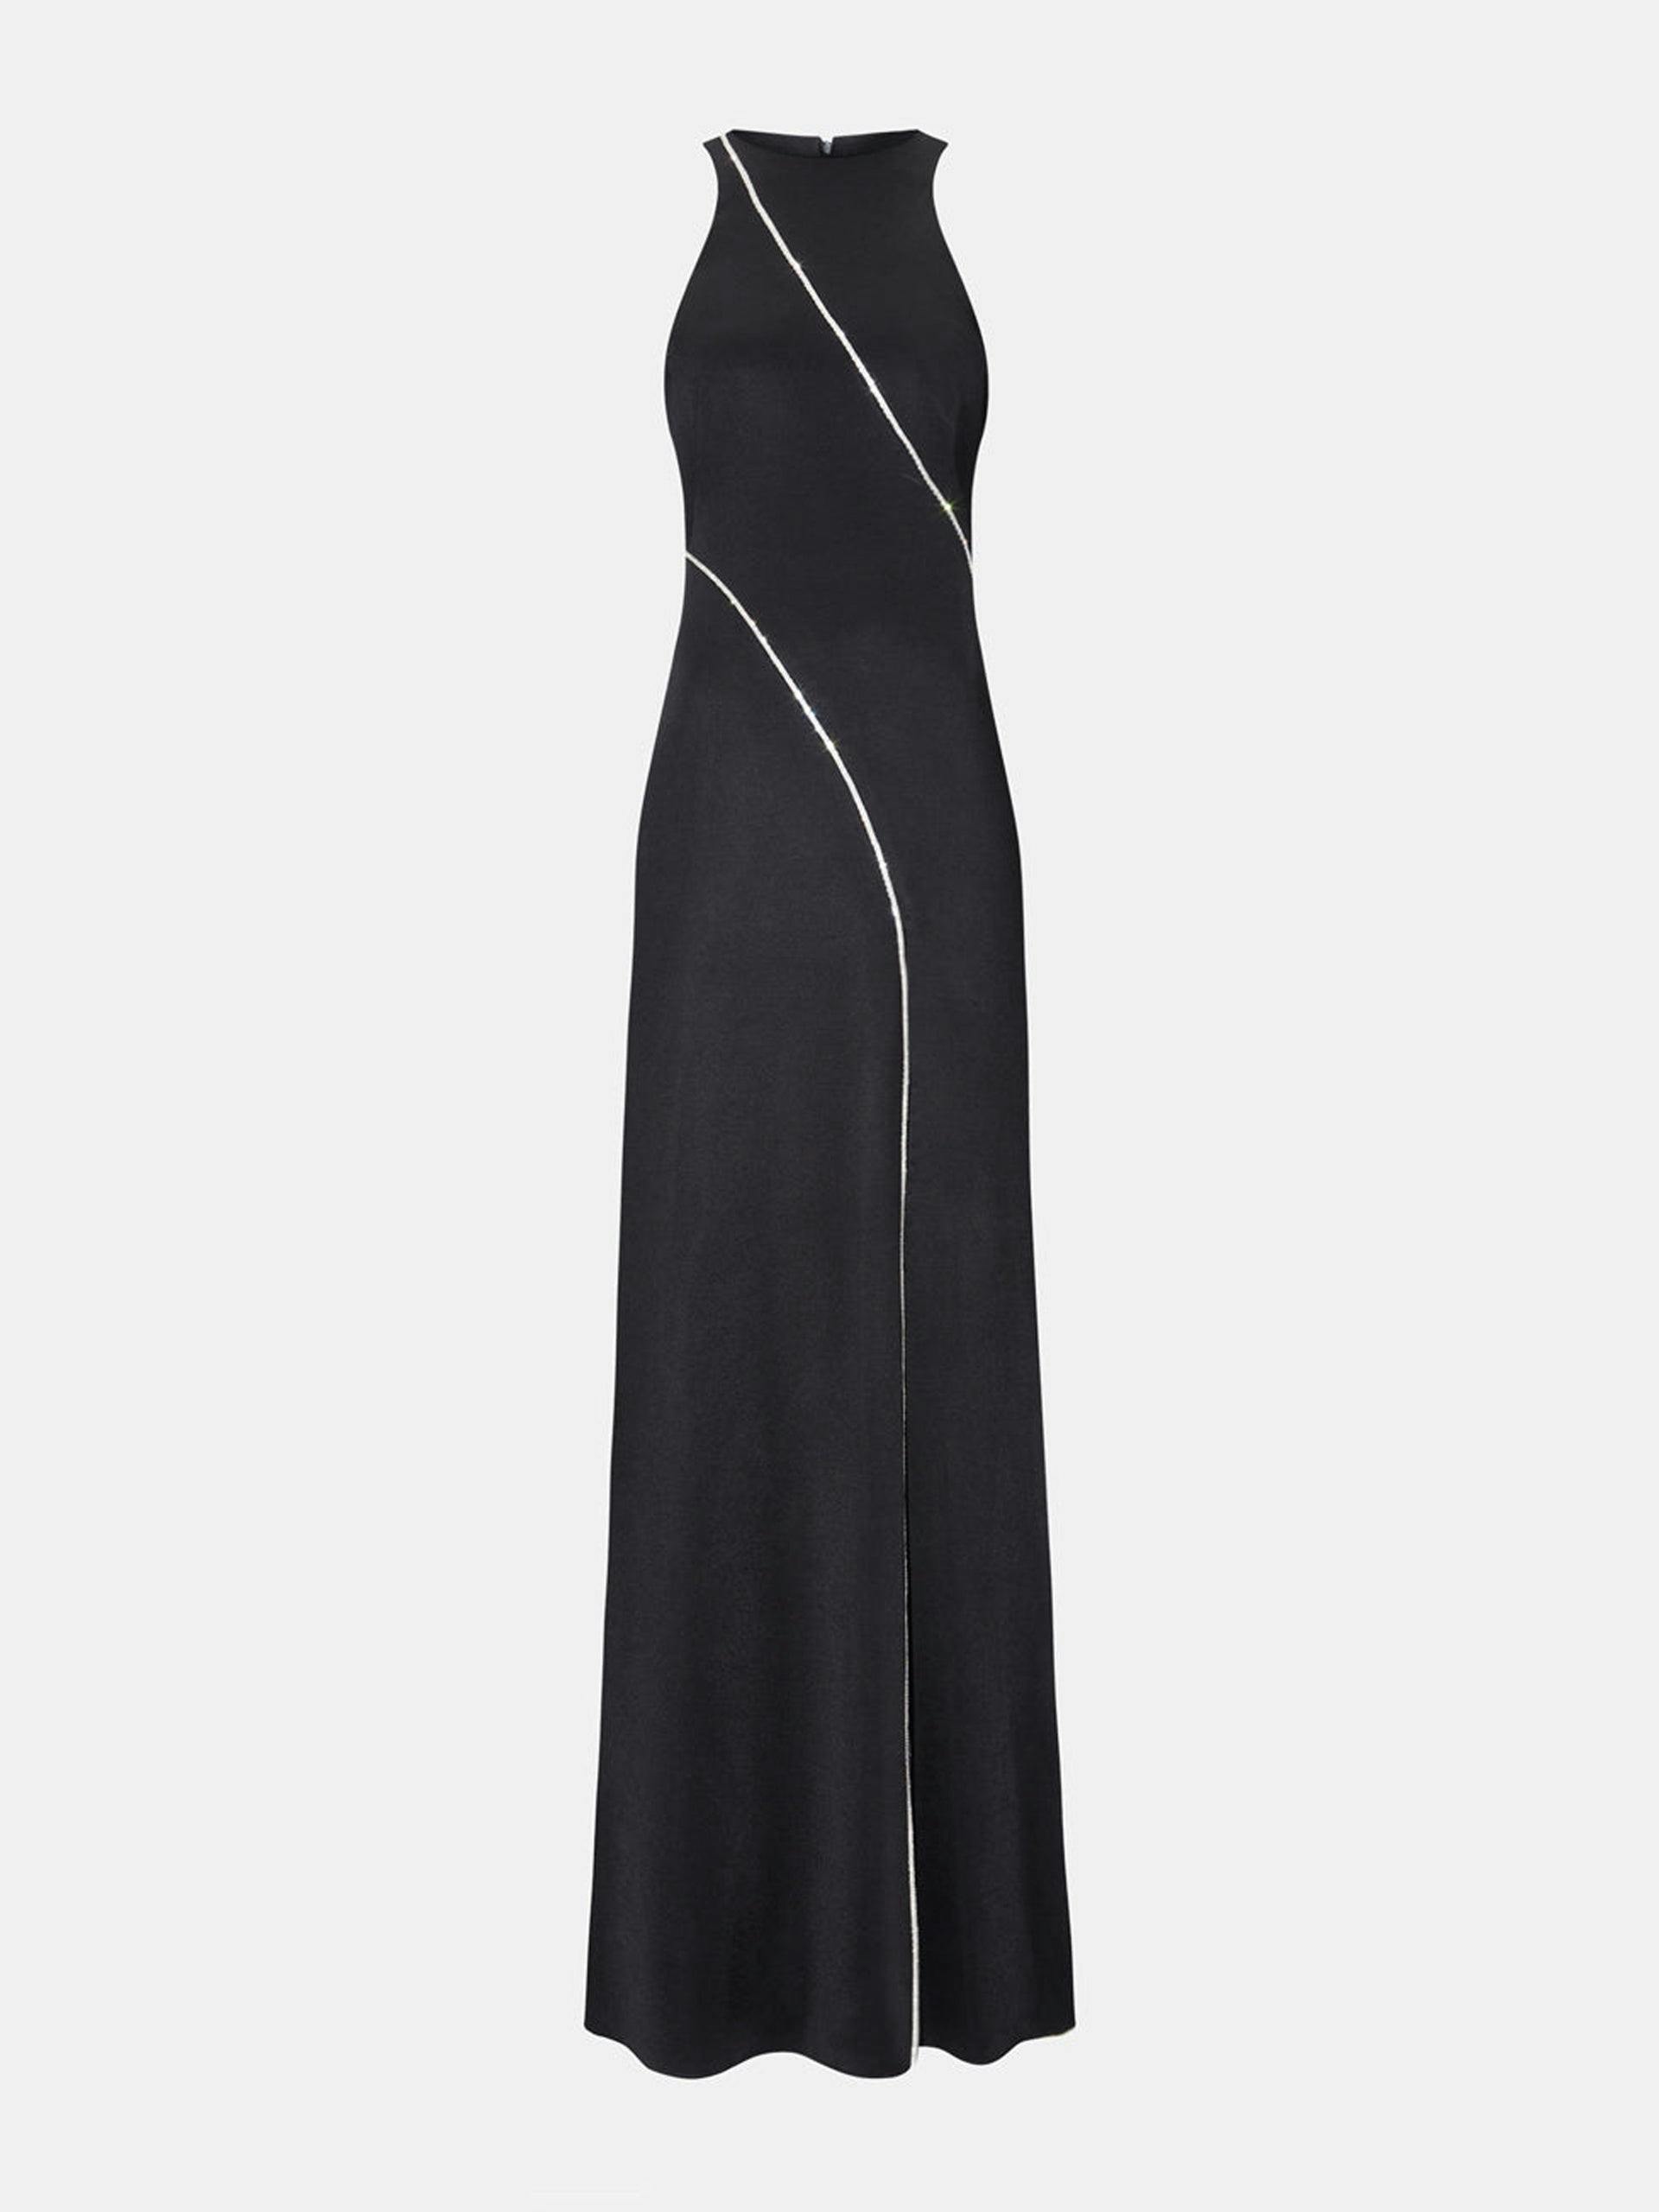 Crystal black cord gown